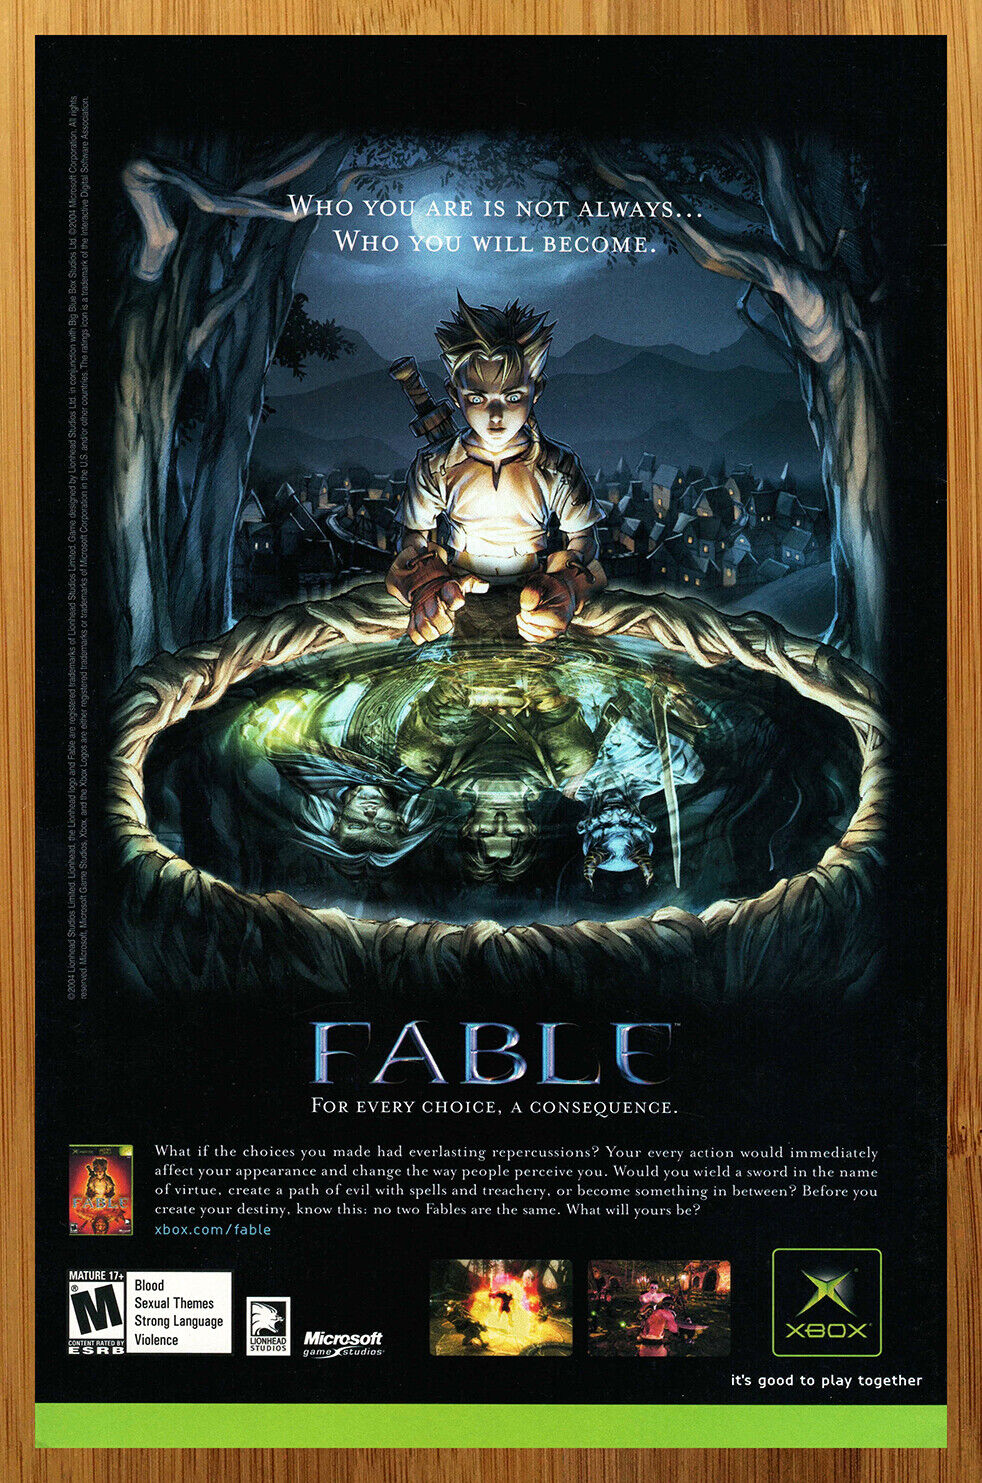 2004 Fable Original Xbox Print Ad/Poster Official Authentic Video Game Promo Art